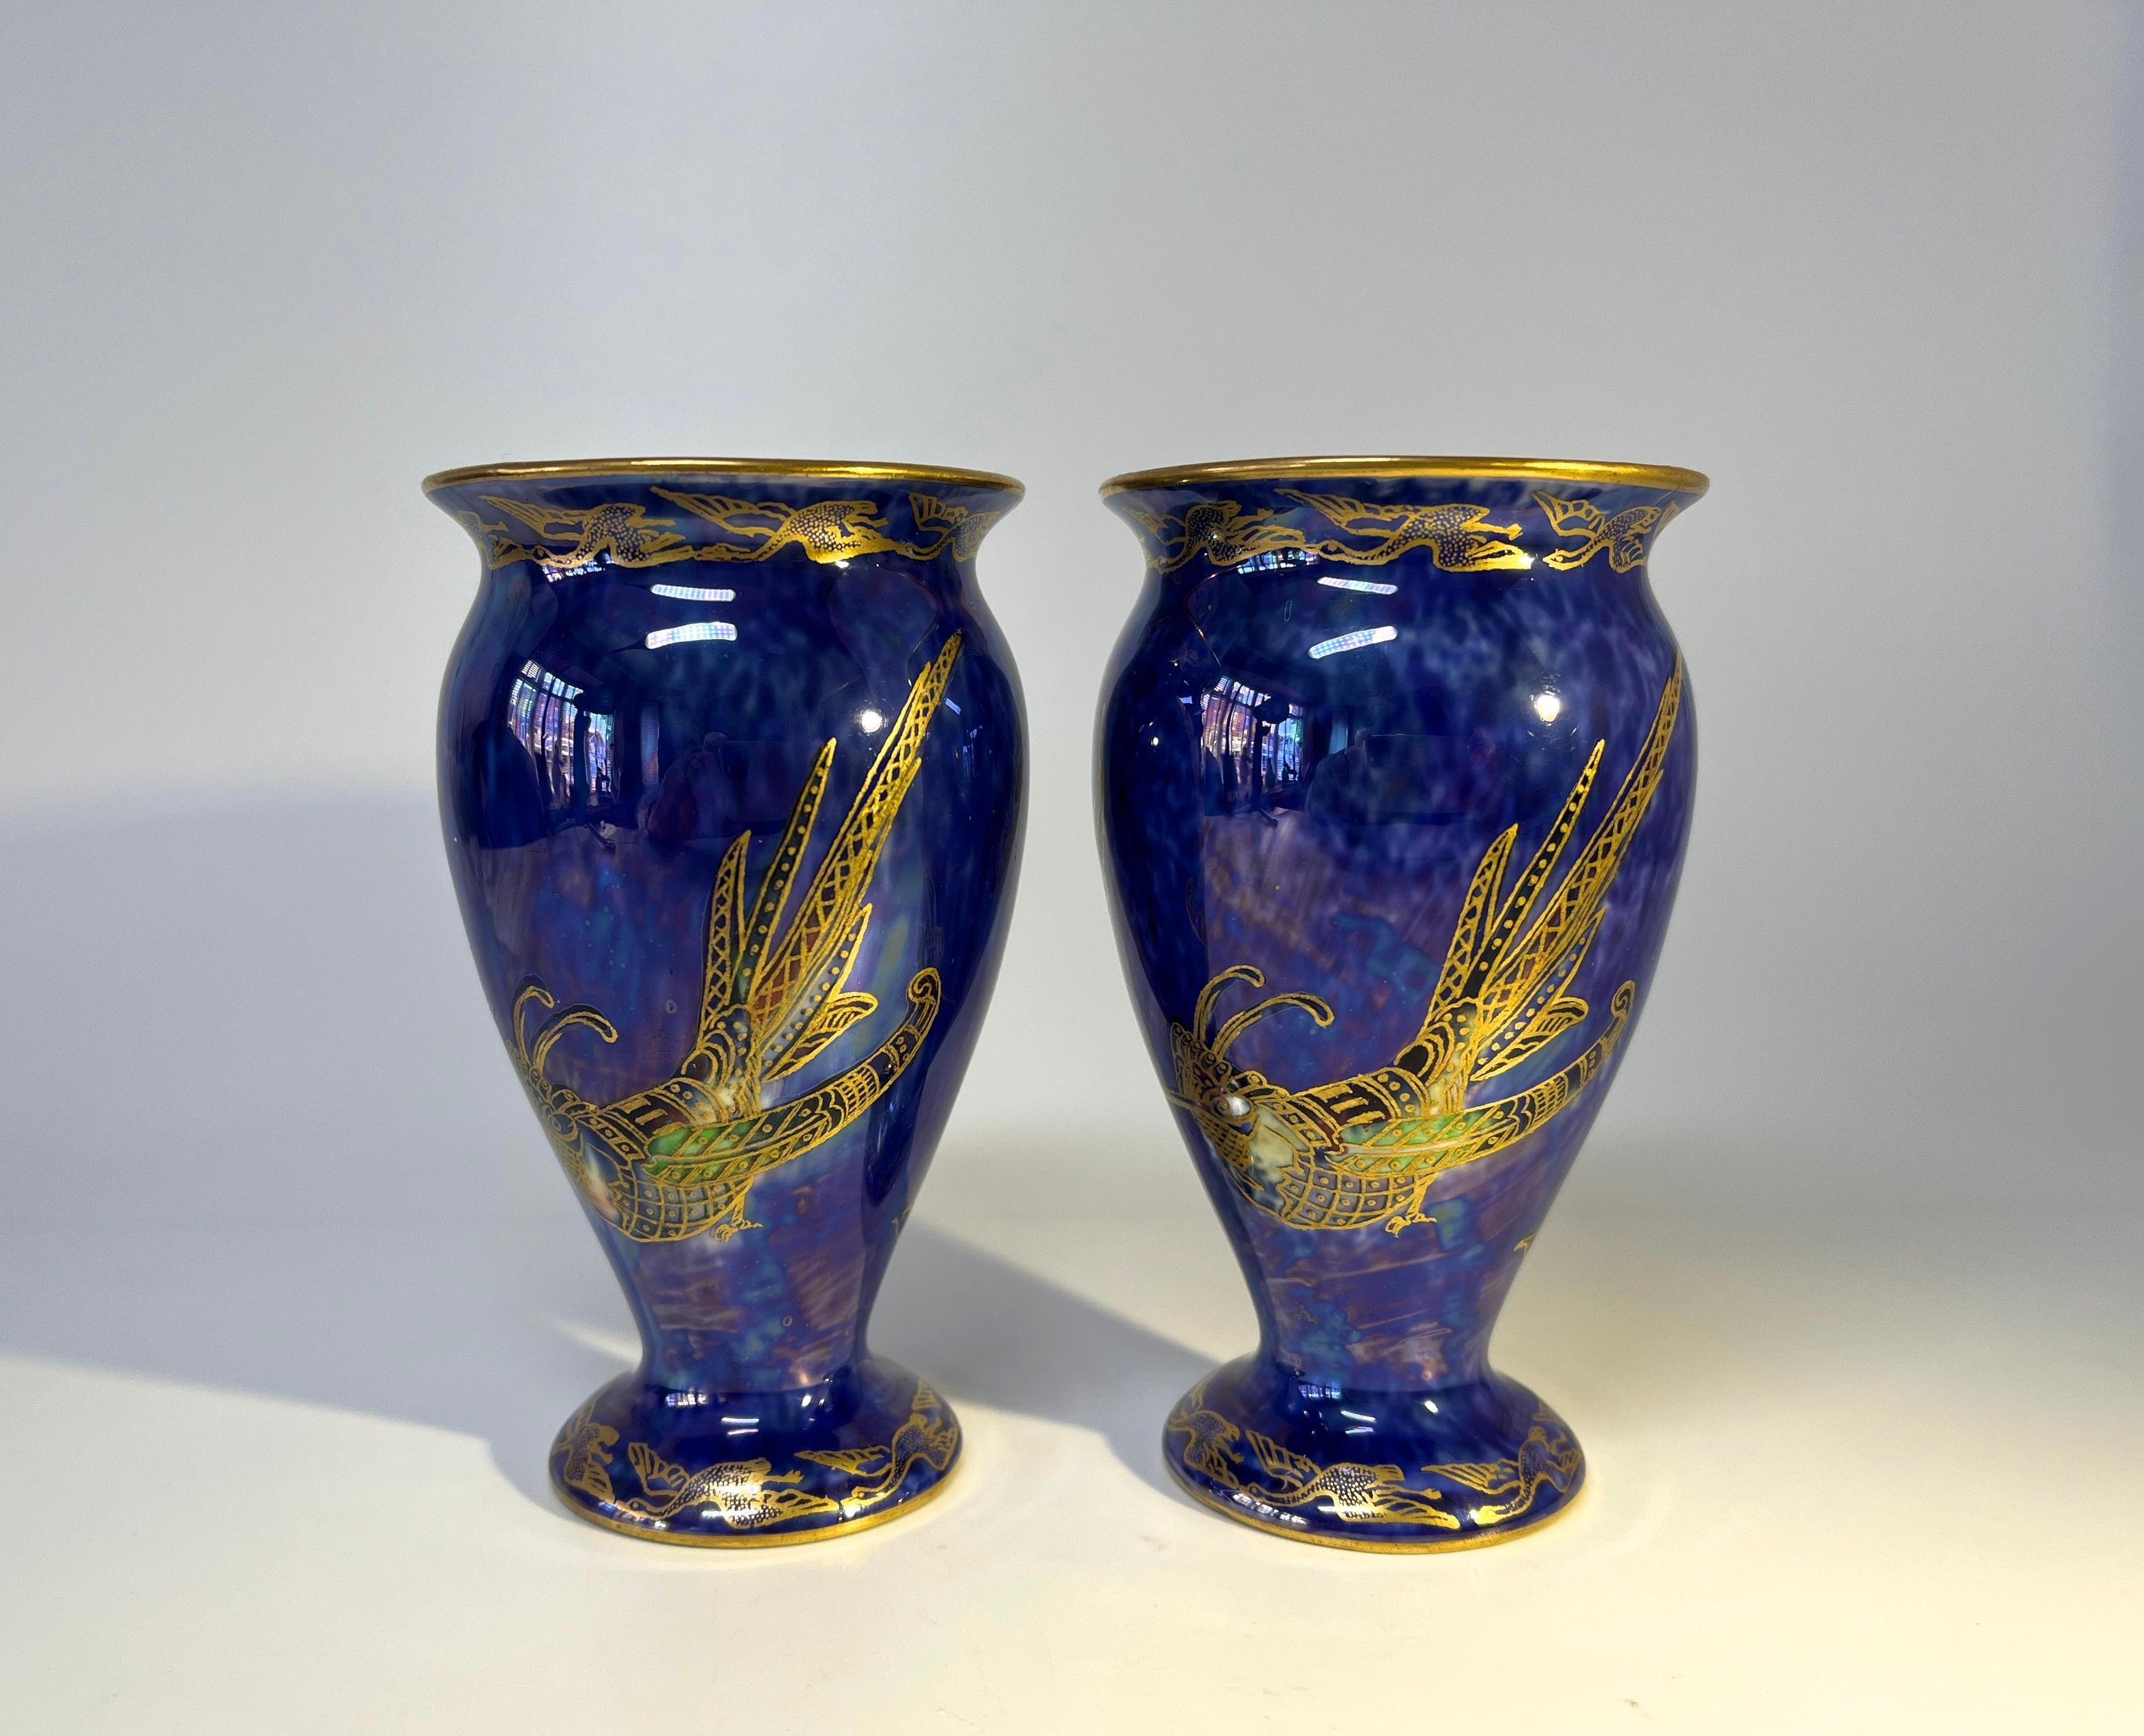 Exquisite pair of Wedgwood Ordinary lustre baluster vases by Daisy Makeig-Jones. Circa 1915.
Dominated by dramatic gilded exotic crested birds on an incredibly rich royal blue mottled ground.
Gilded flying geese surround both upper and lower